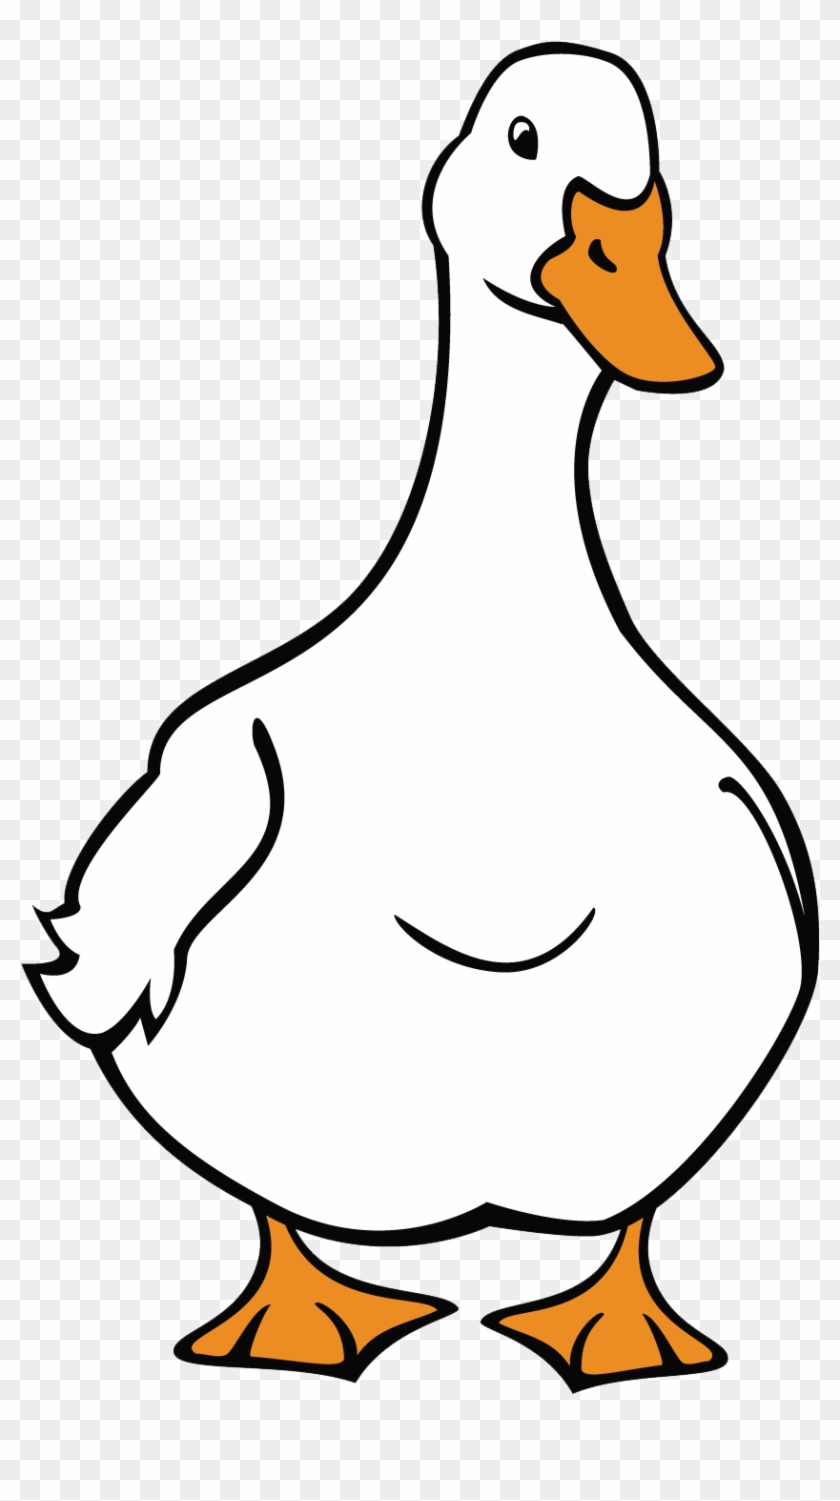 Free Original Clip Art To Make Your Own Stationery - Duck #1676038